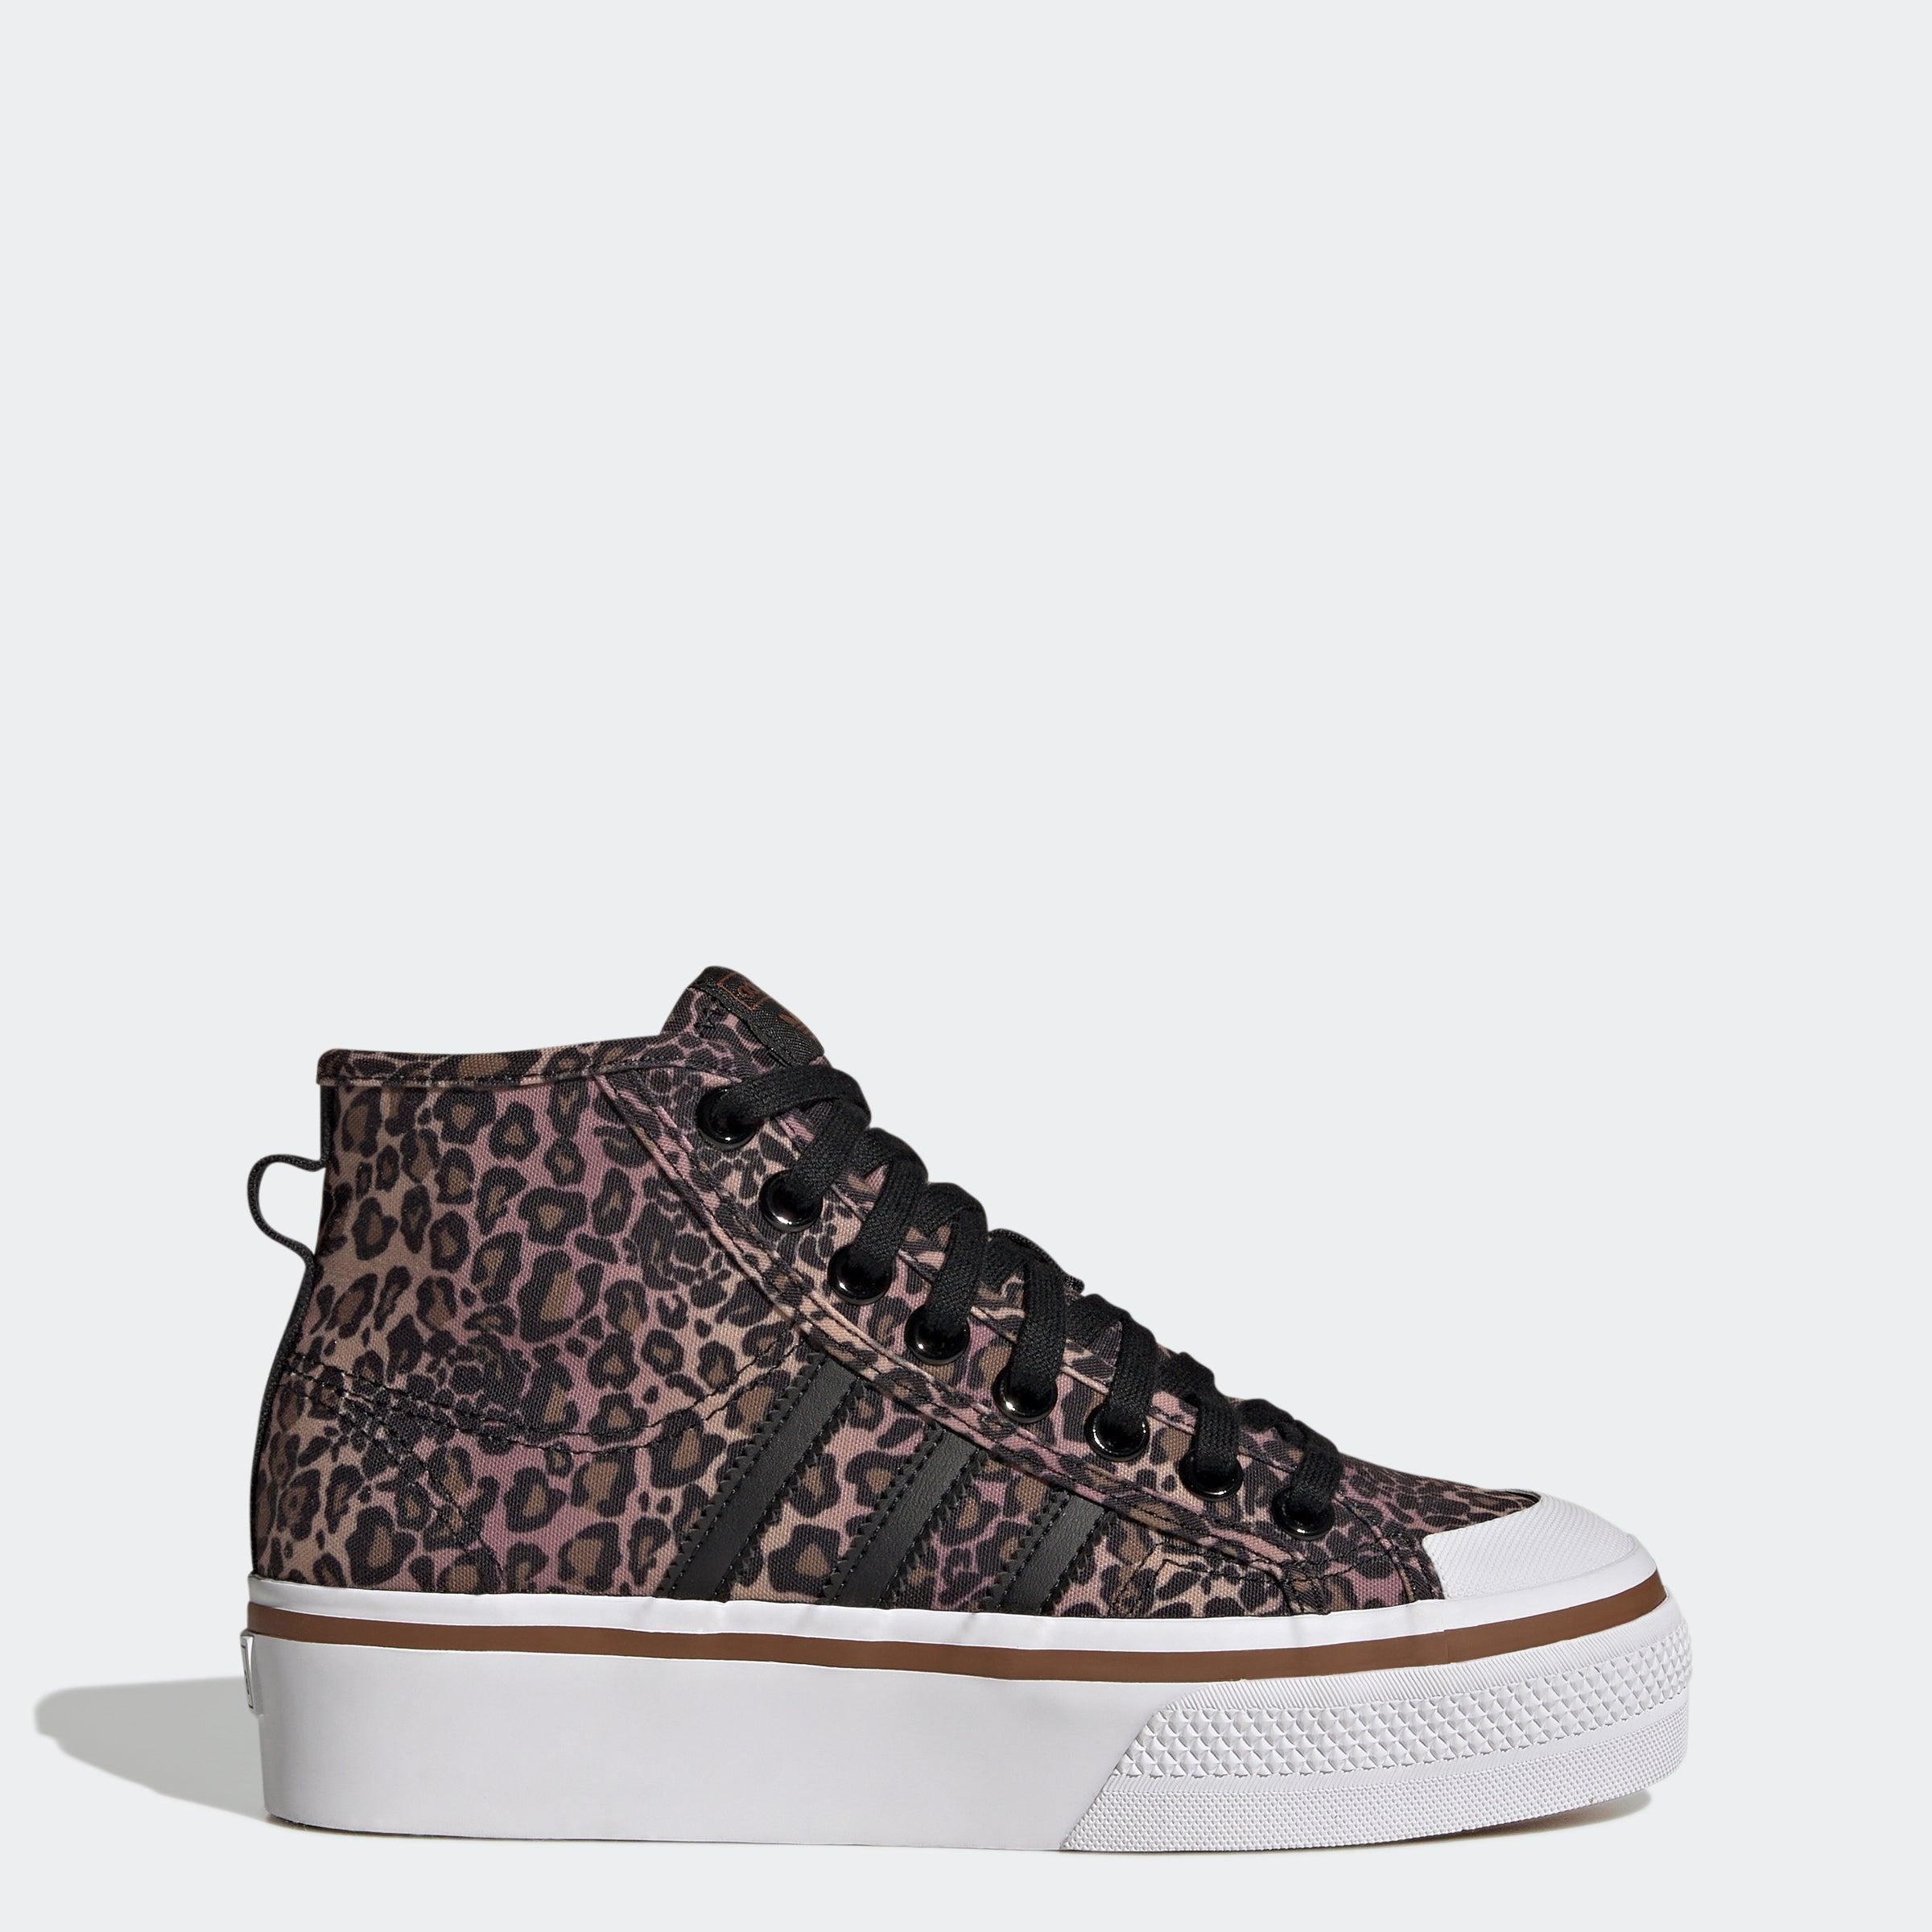 Nizza Brown | Shoes Lyst adidas Platform Mid in